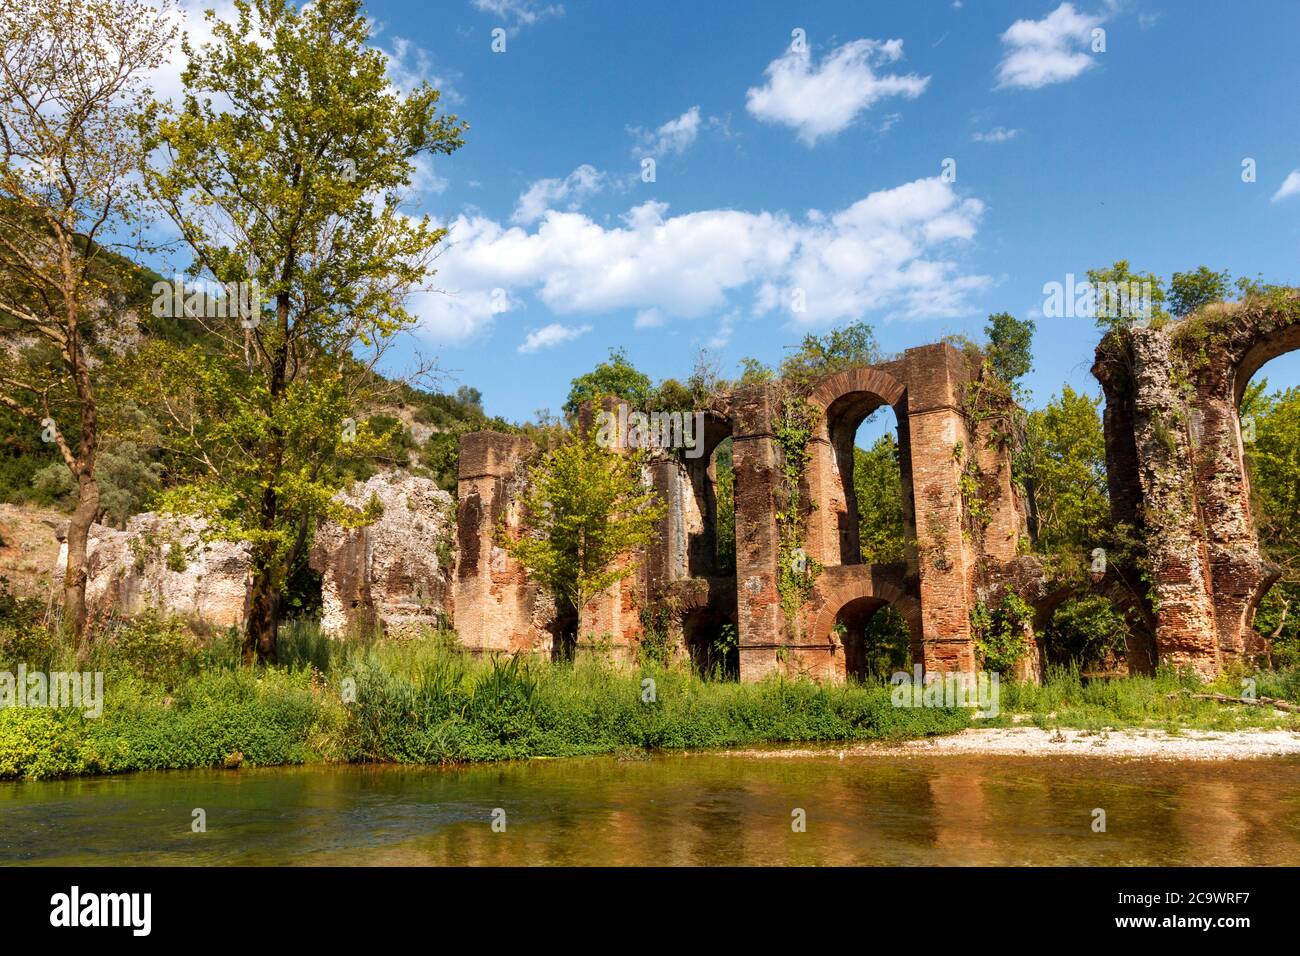 The ancient aqueduct that provided water to Nikopolis, the town built by Roman emperor Augustus Octavian (Octavius) after defeating Pompeius. Stock Photo